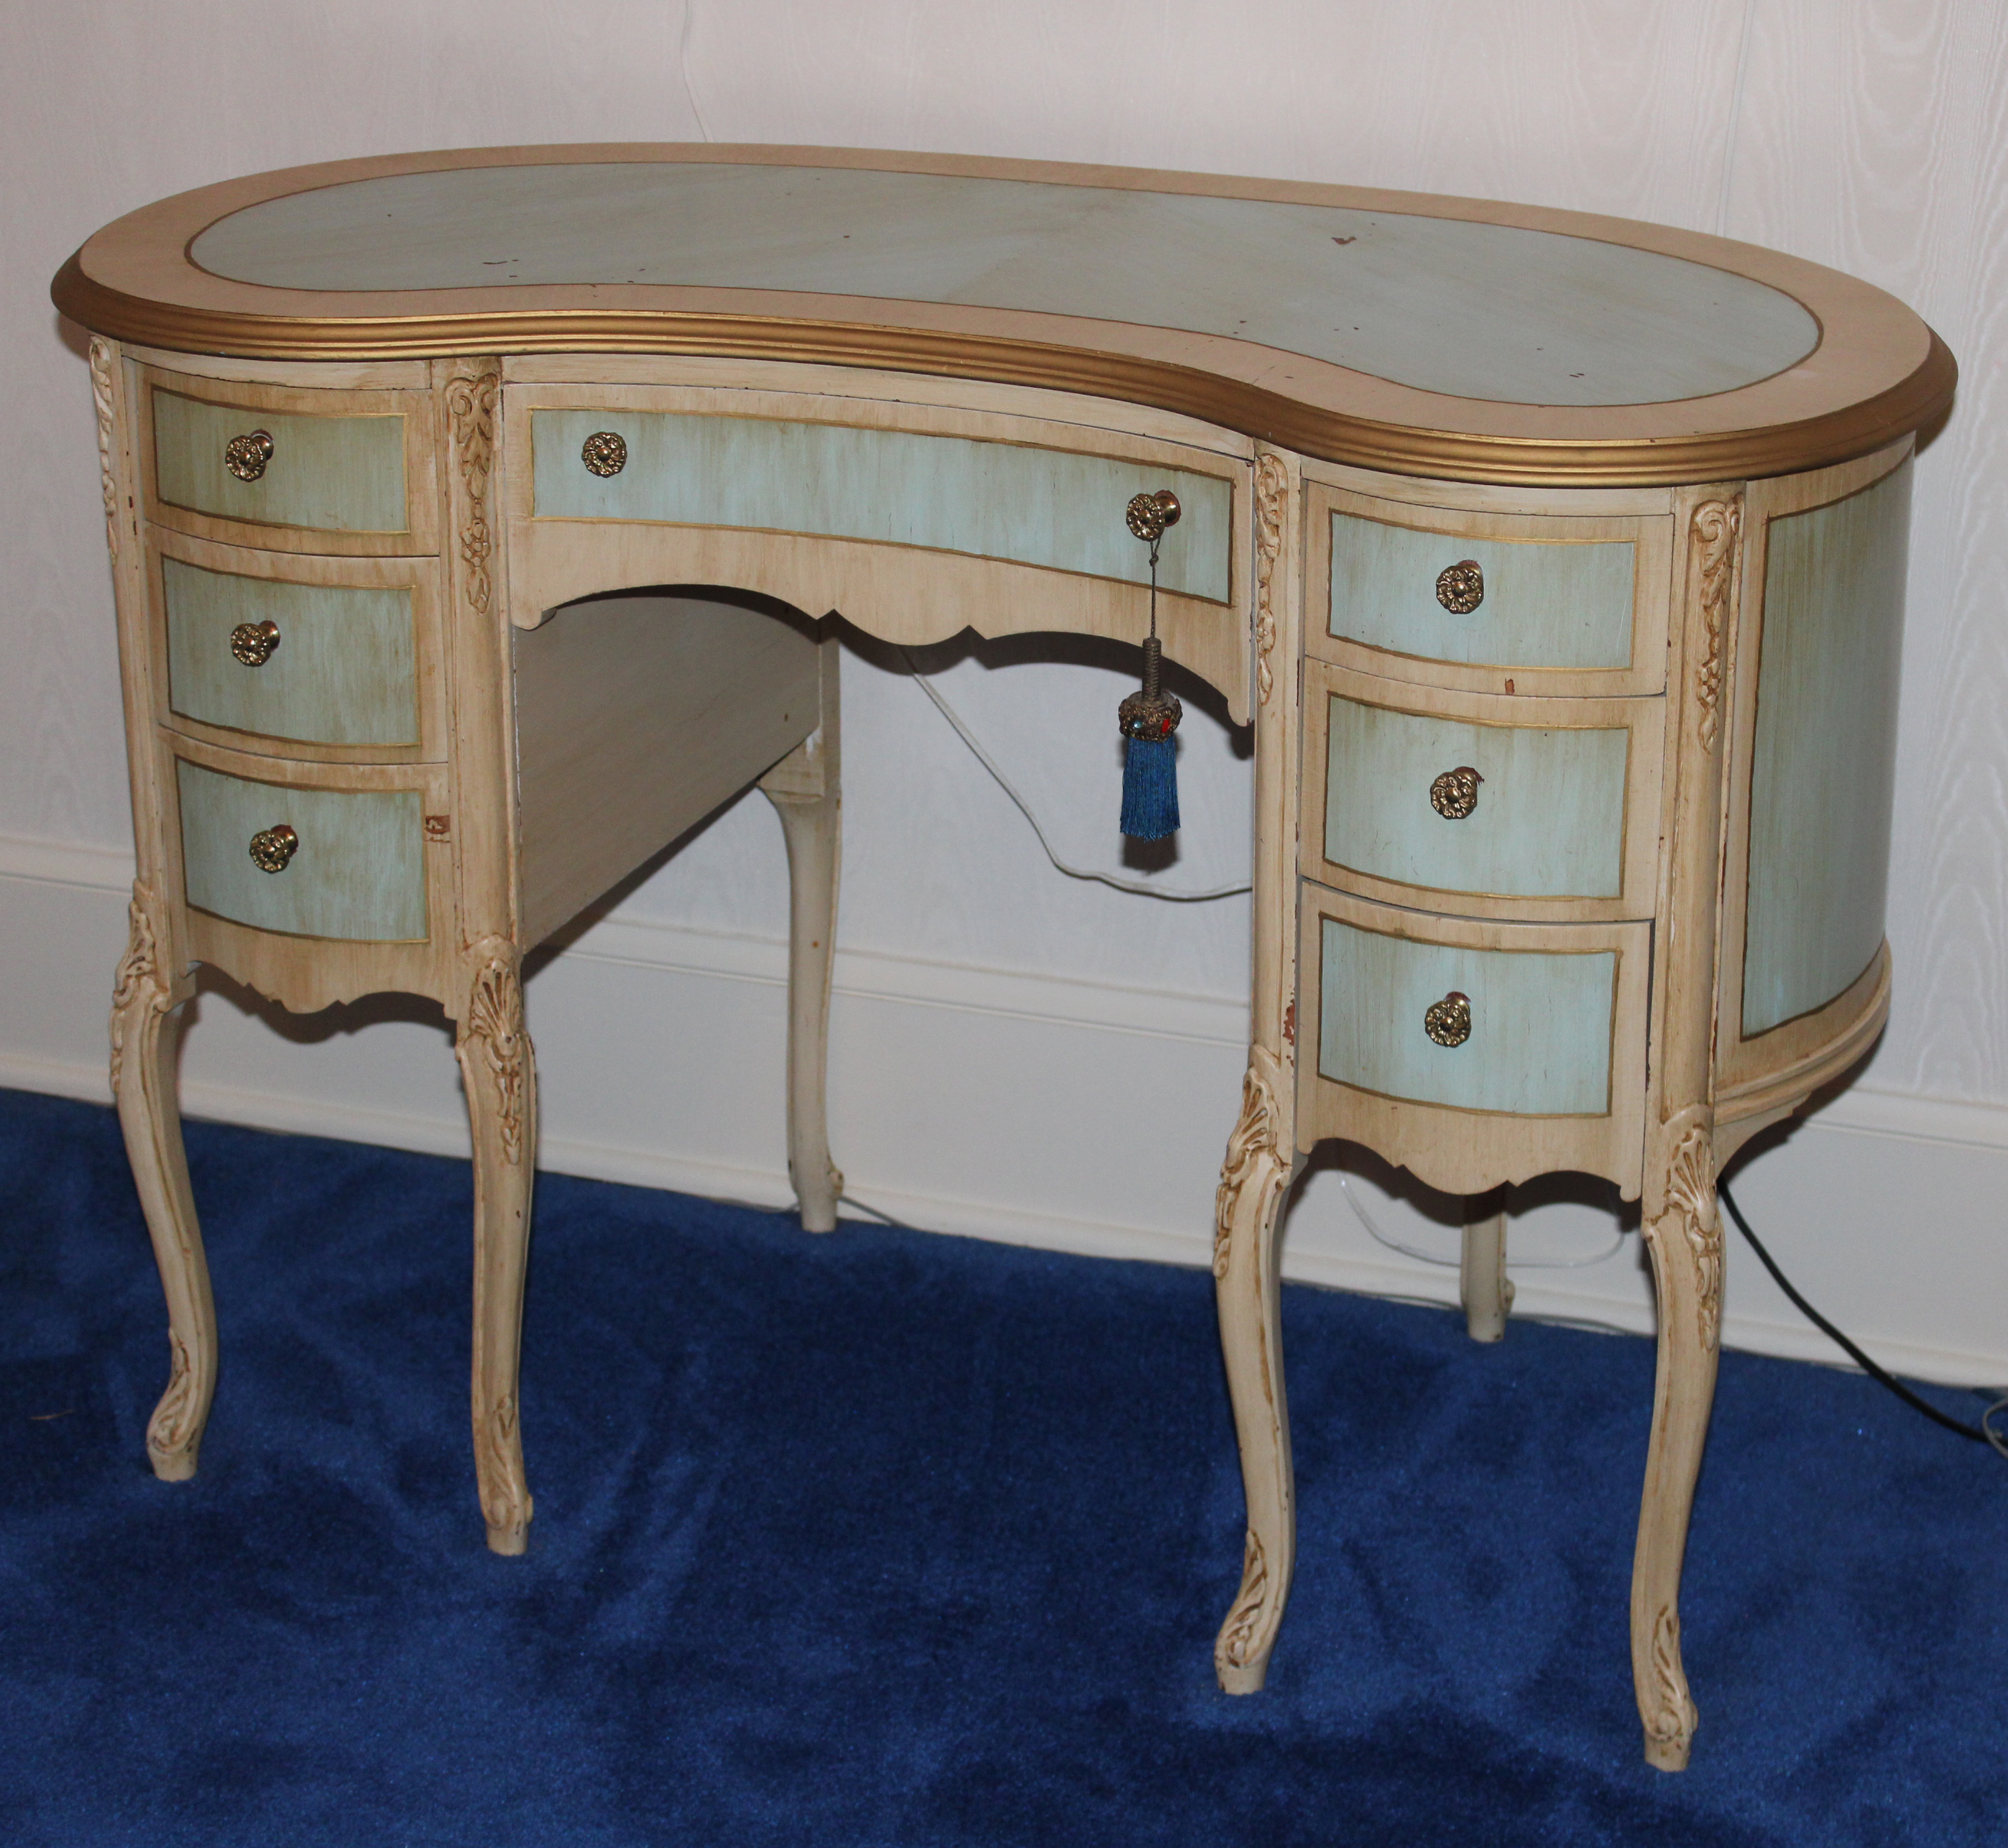 PAINTED FRENCH KIDNEY DESK PAINTED